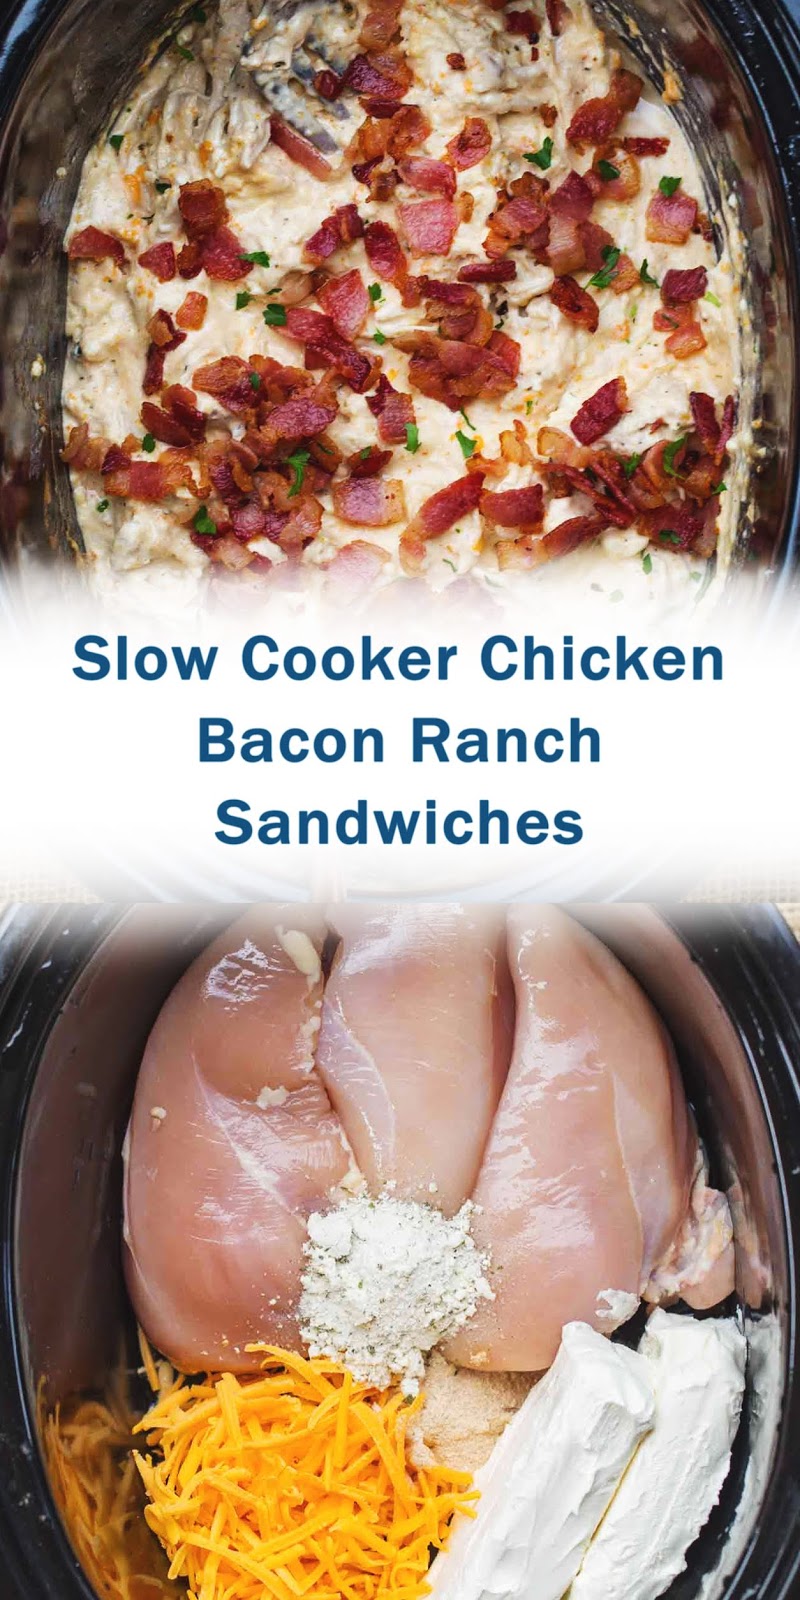 Slow Cooker Chicken Bacon Ranch Sandwiches